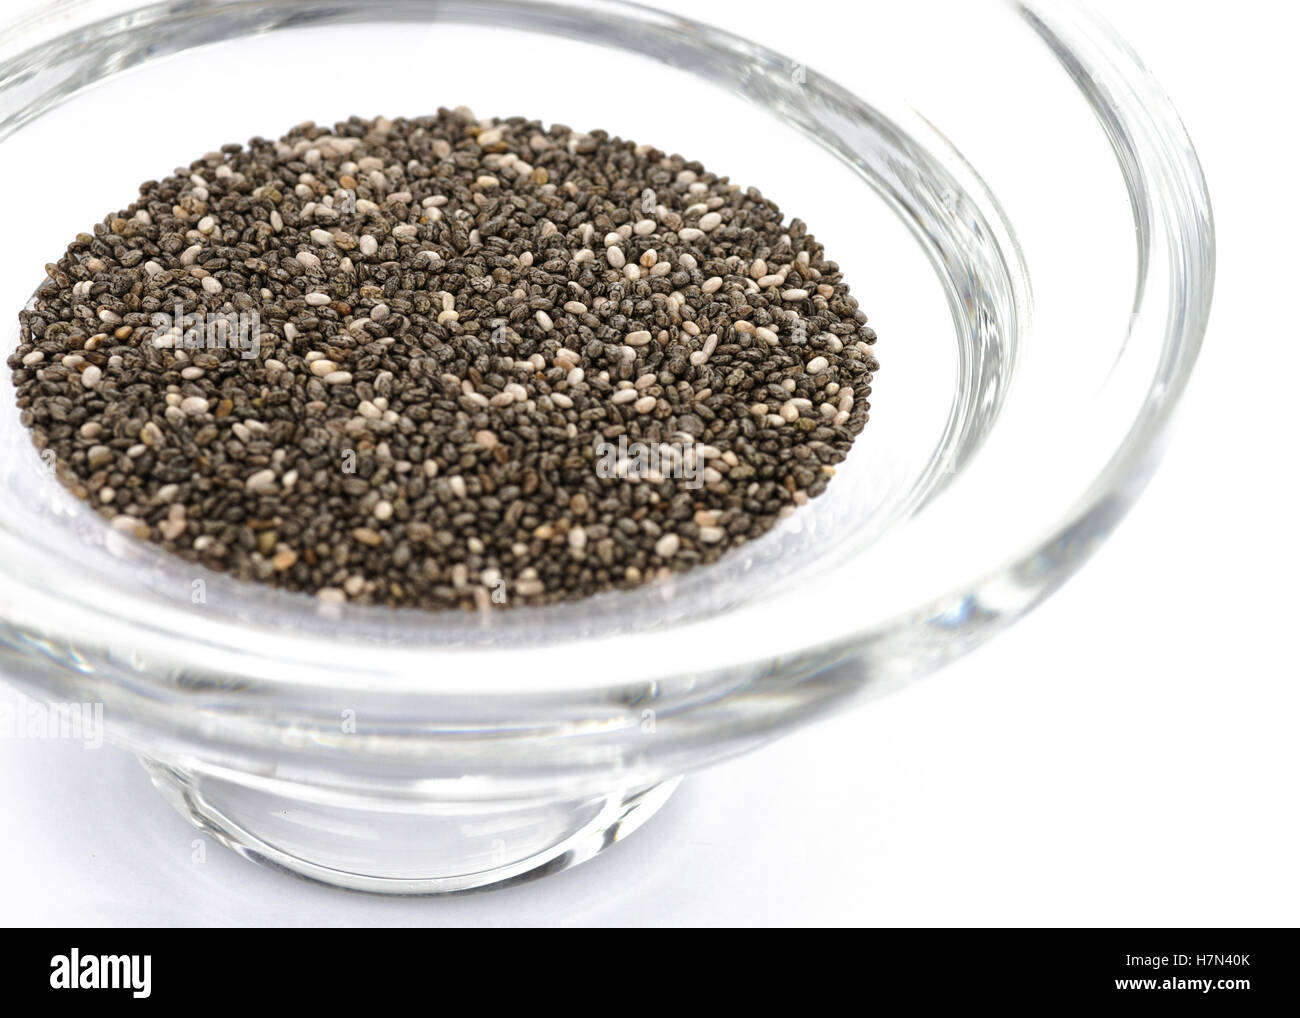 Chia seeds Selective focus in a thick round glass bowl on a bright white background, Stock Photo